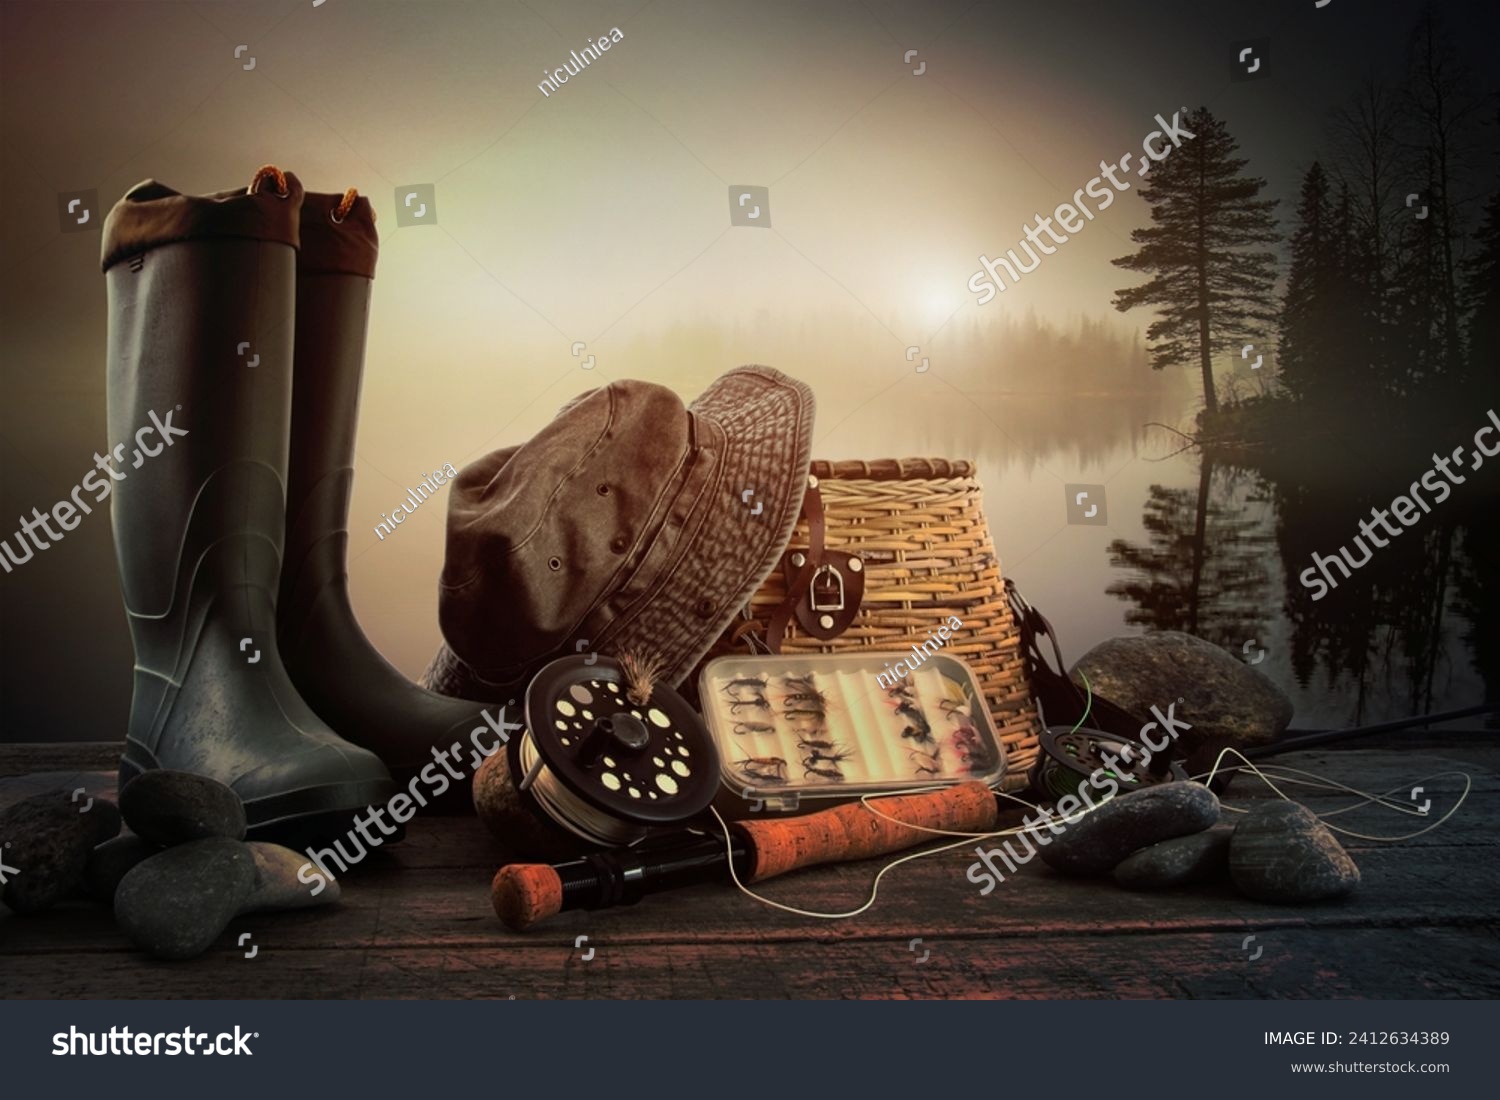 Fly fishing equipment on deck with view of a misty lake background #2412634389